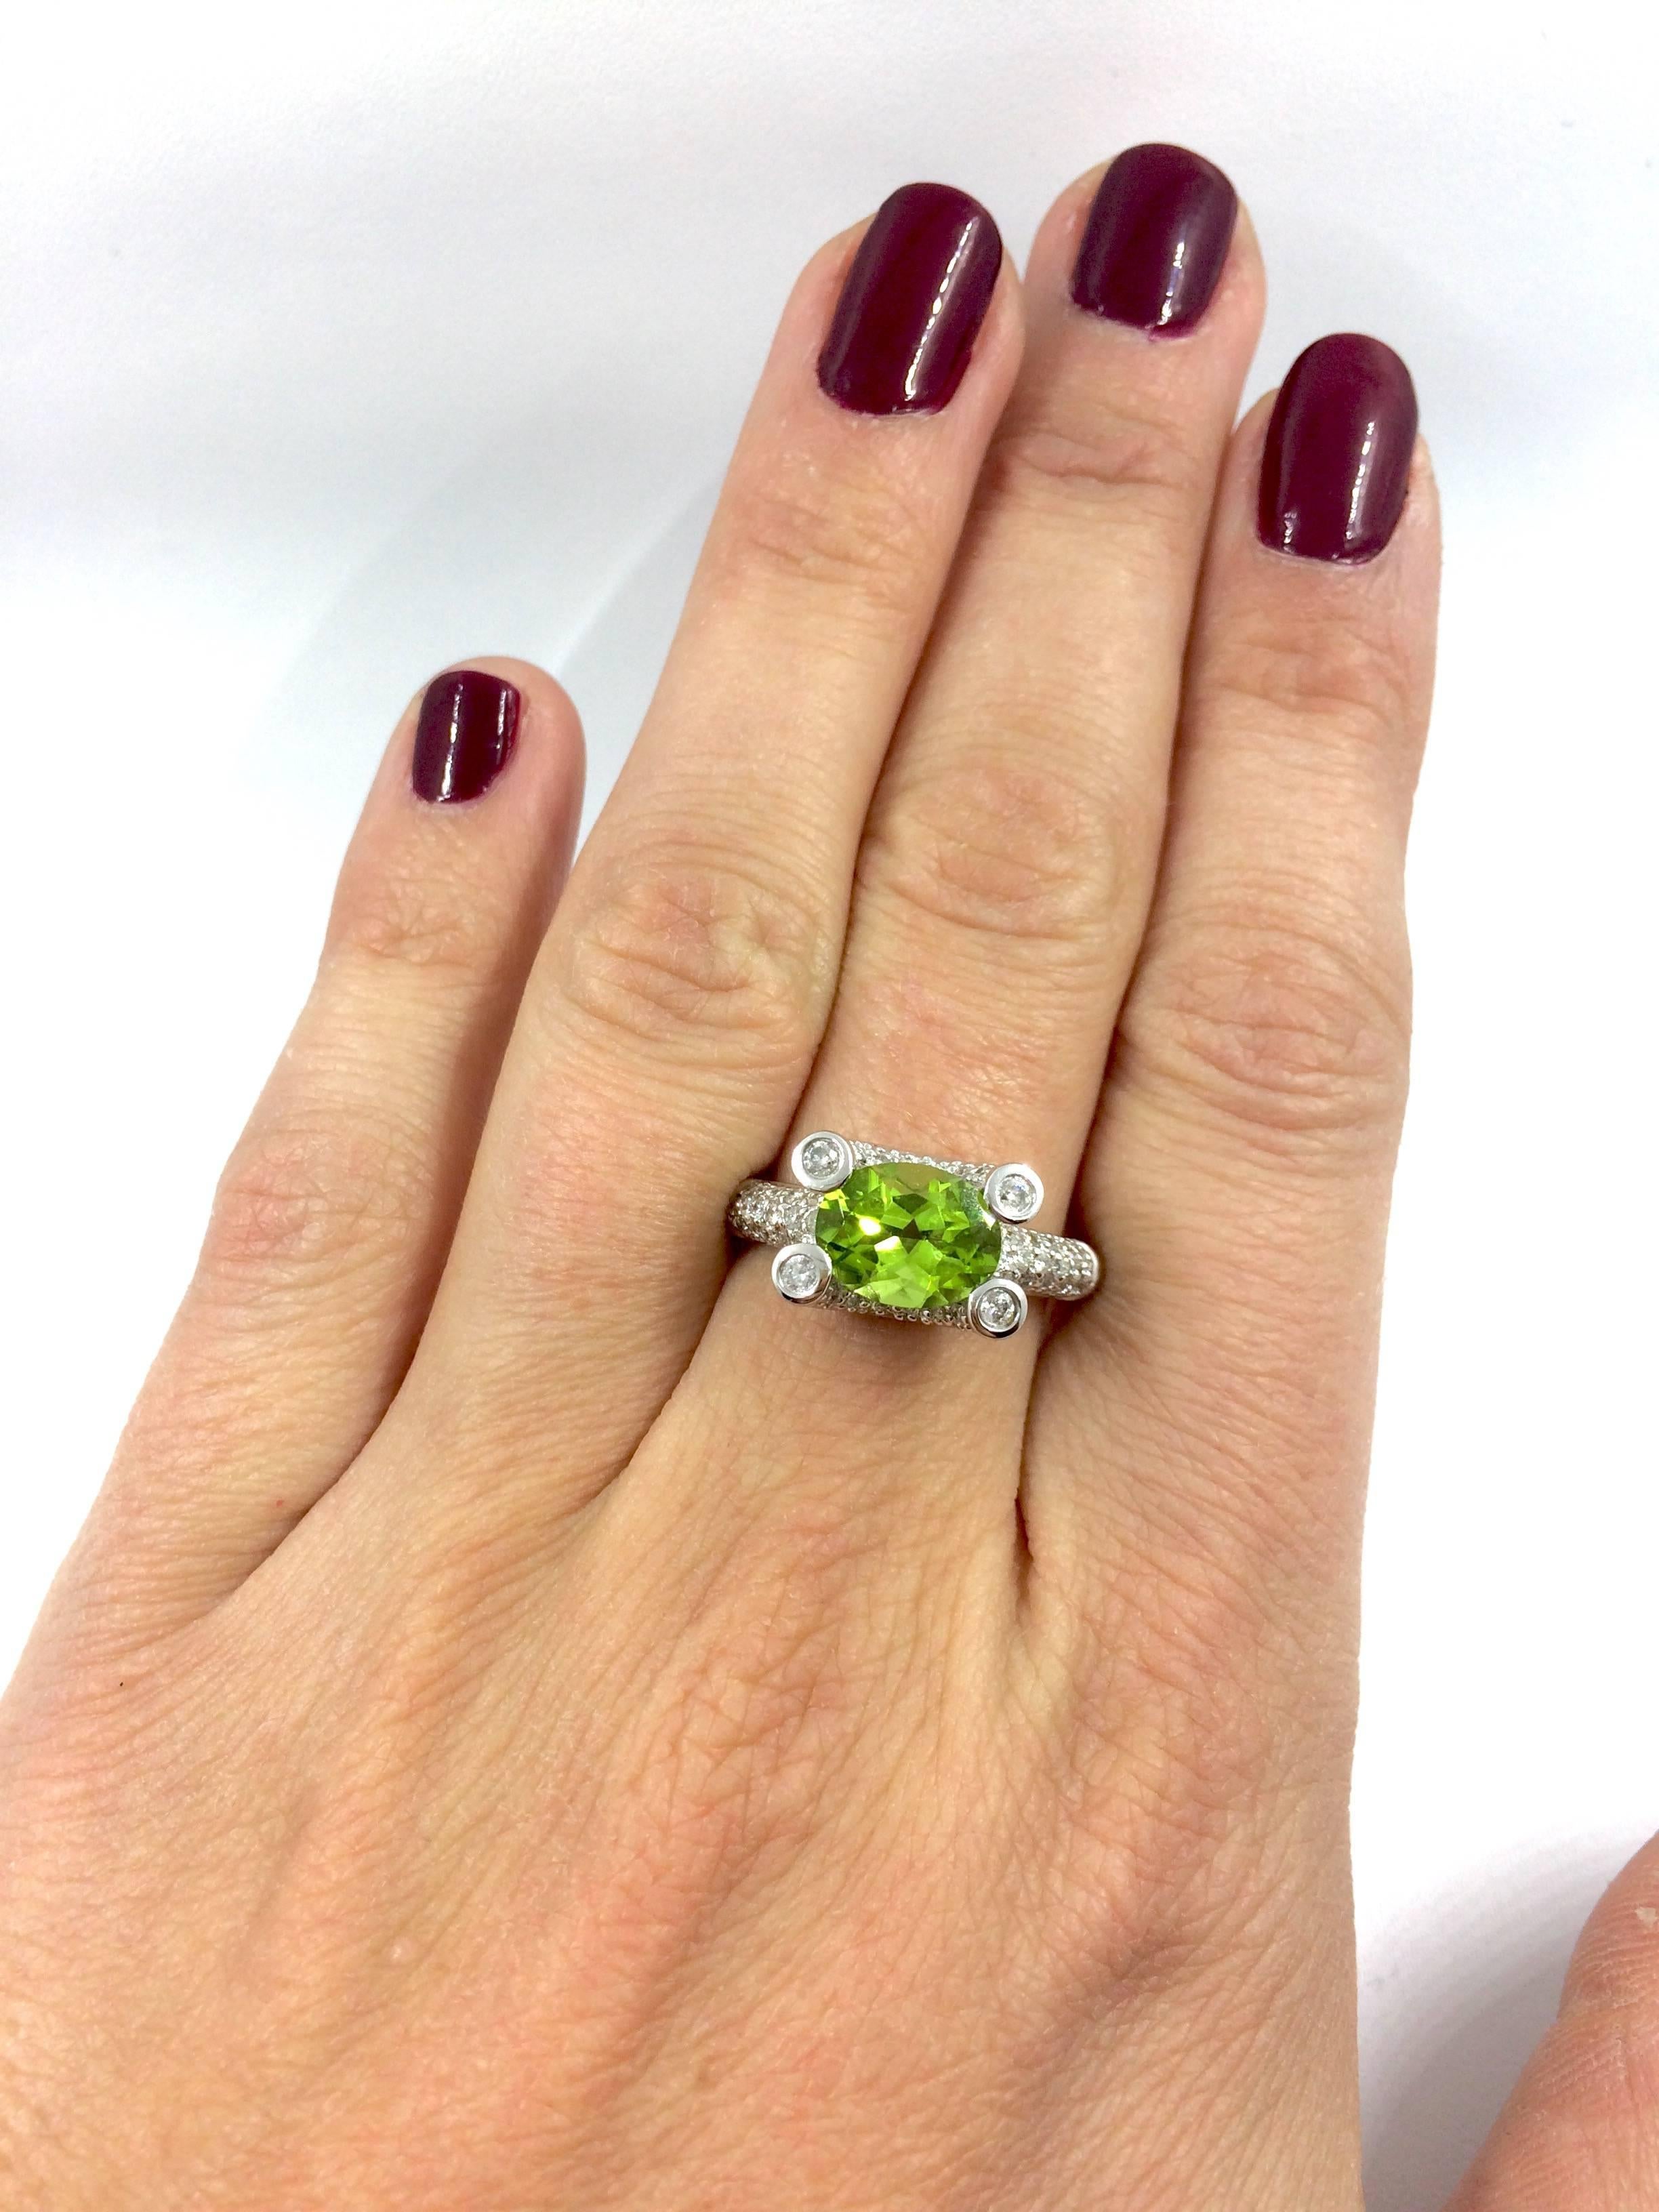 An original white gold ring set in the middle with an exceptional peridot, surrounded by brilliant cut diamonds set on the body of ring and on the peridot's basket. 4 brilliant cut diamonds are setted on the claws.
- Peridot weight: 1.88 carat
-